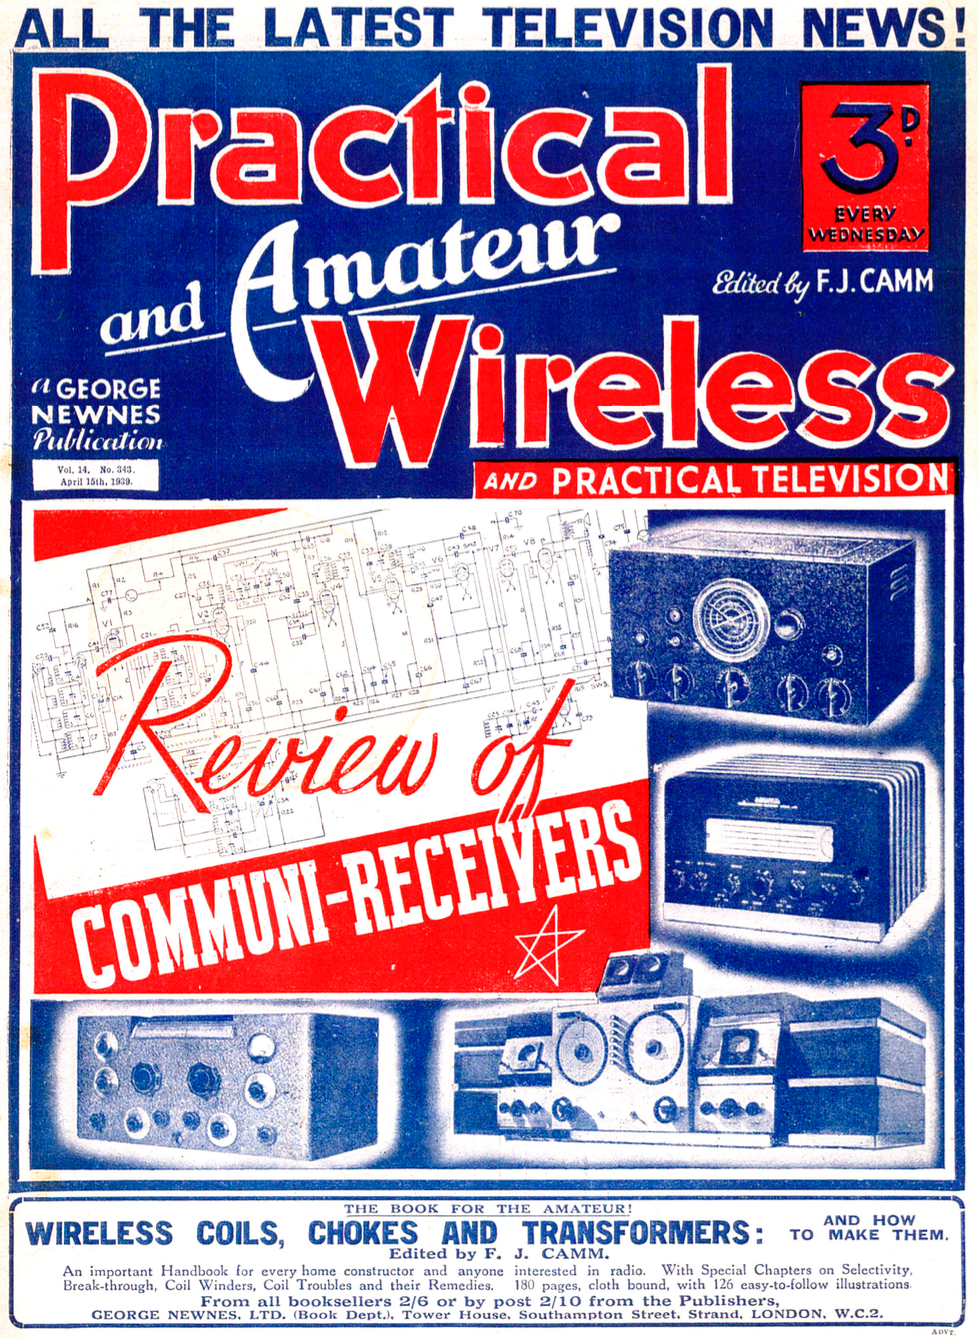 Review of Communications Receivers - Practical and Amateur Wireless (1939-04)